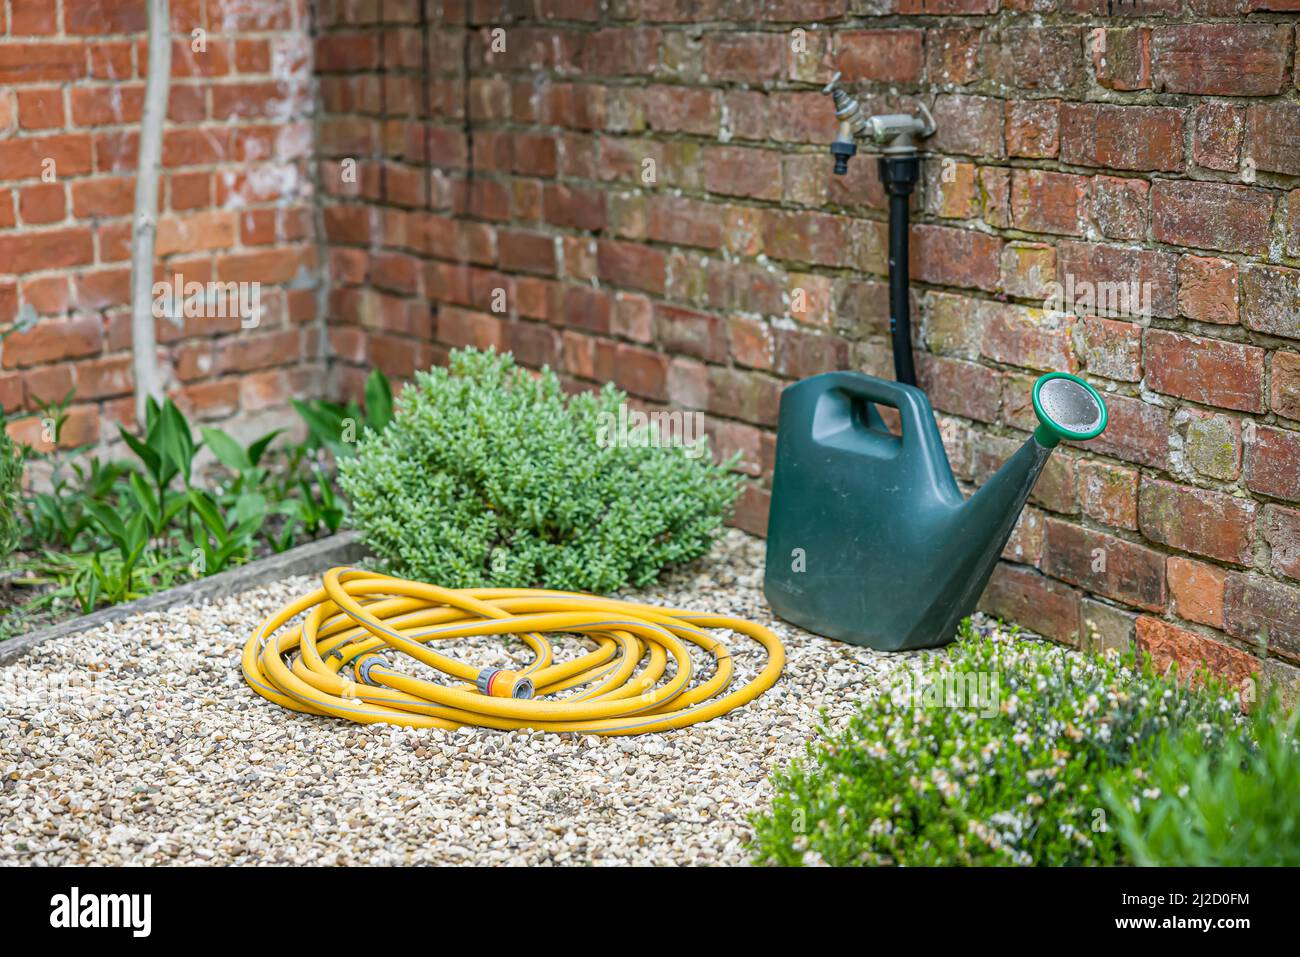 Watering can, garden hose (hosepipe) and outside tap in a UK back garden. Gardening scene Stock Photo